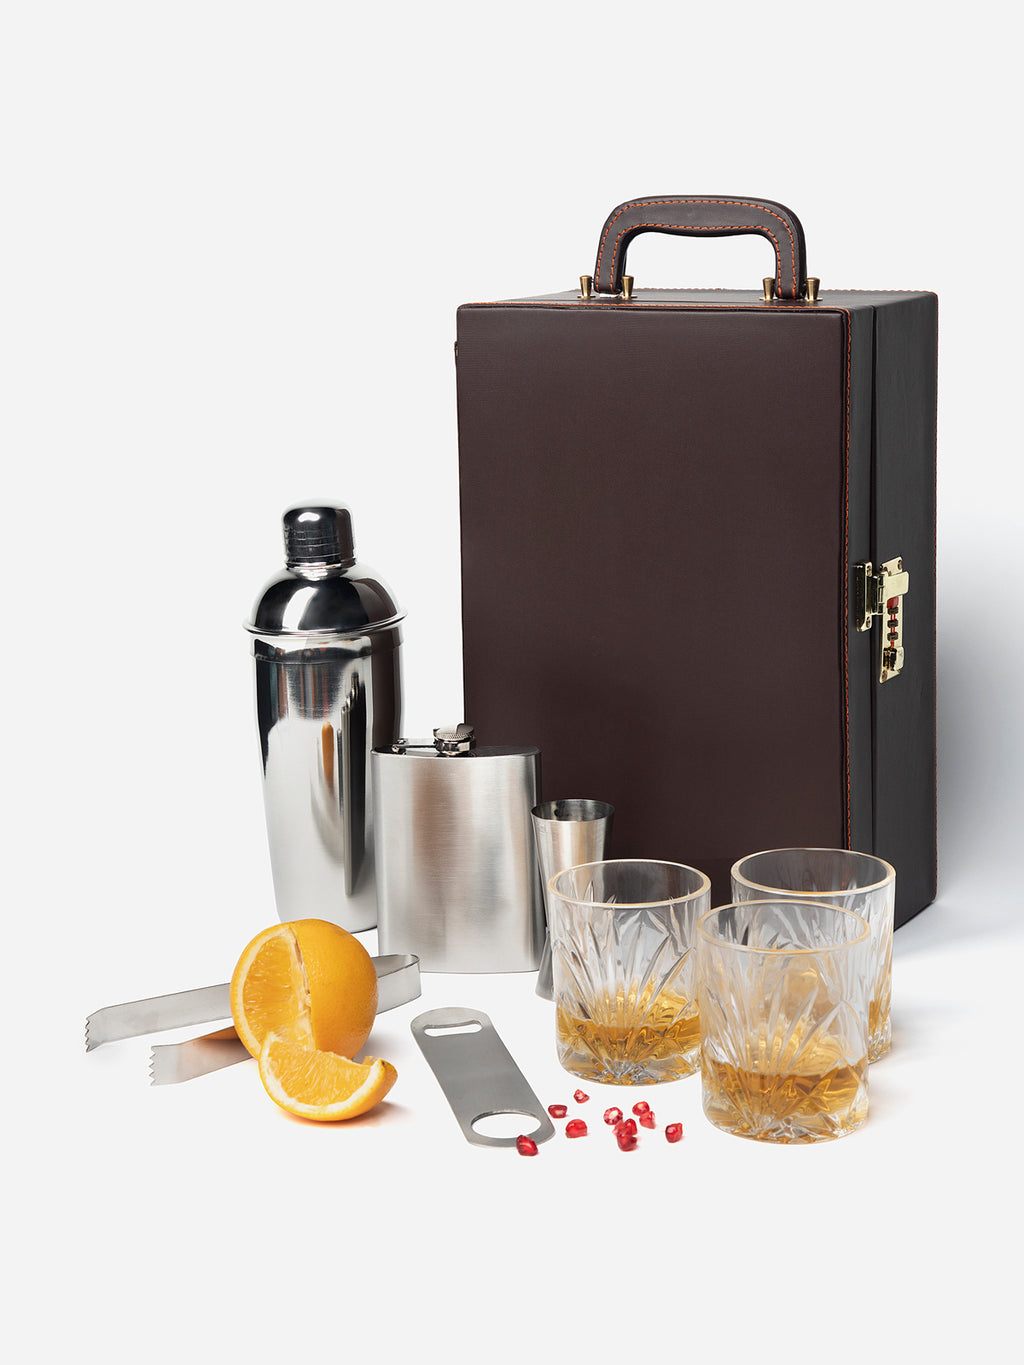 Anything & Everything Bar Set | Portable Leatherette Bar Set with Accessories - Holds 3 Whisky Glasses | Bar Box | Whisky Case | Wine Box (Brown)